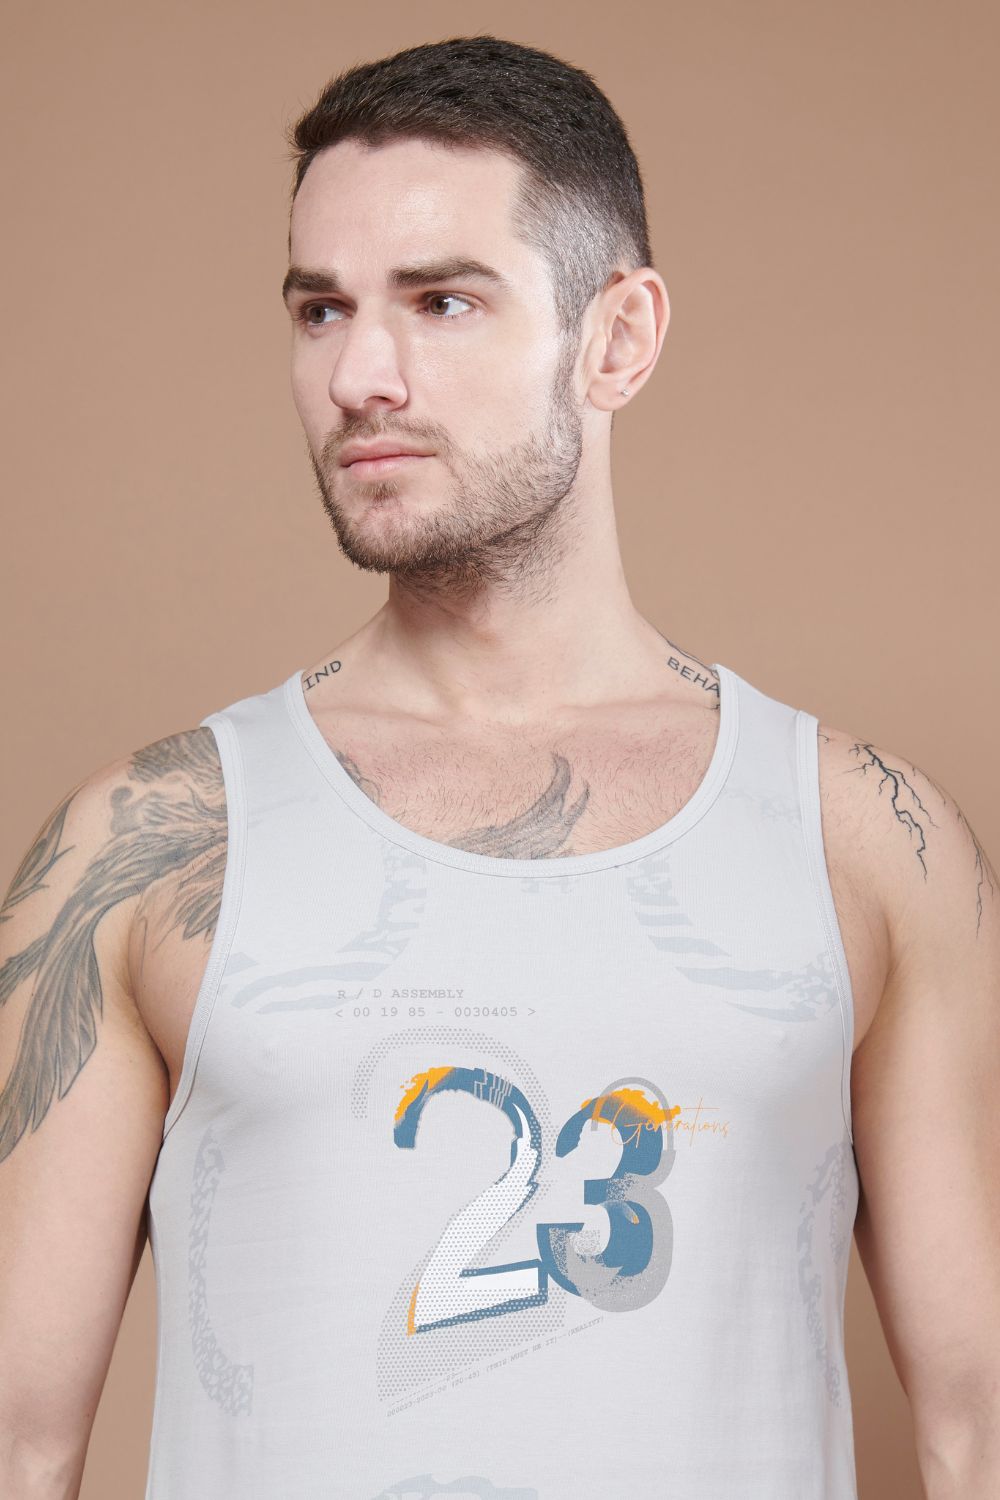 Vapour Blue colored cotton Sleeveless Printed Tank Tees for men, front view.